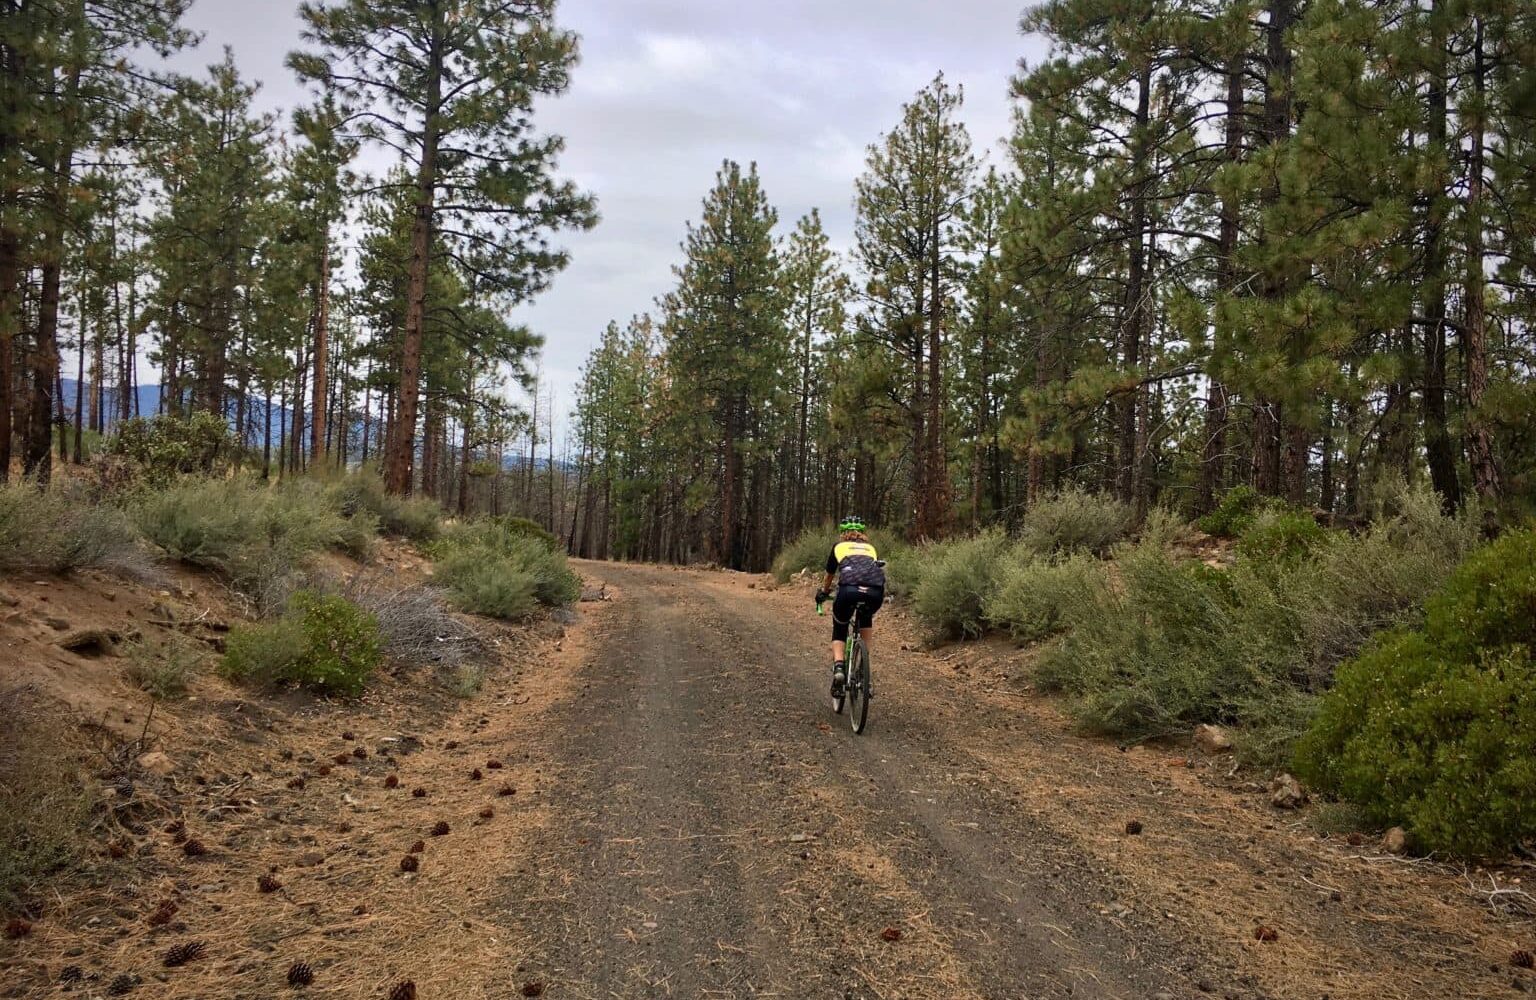 Cyclist on gravel road in the Skyline Forest near Bend, Oregon.